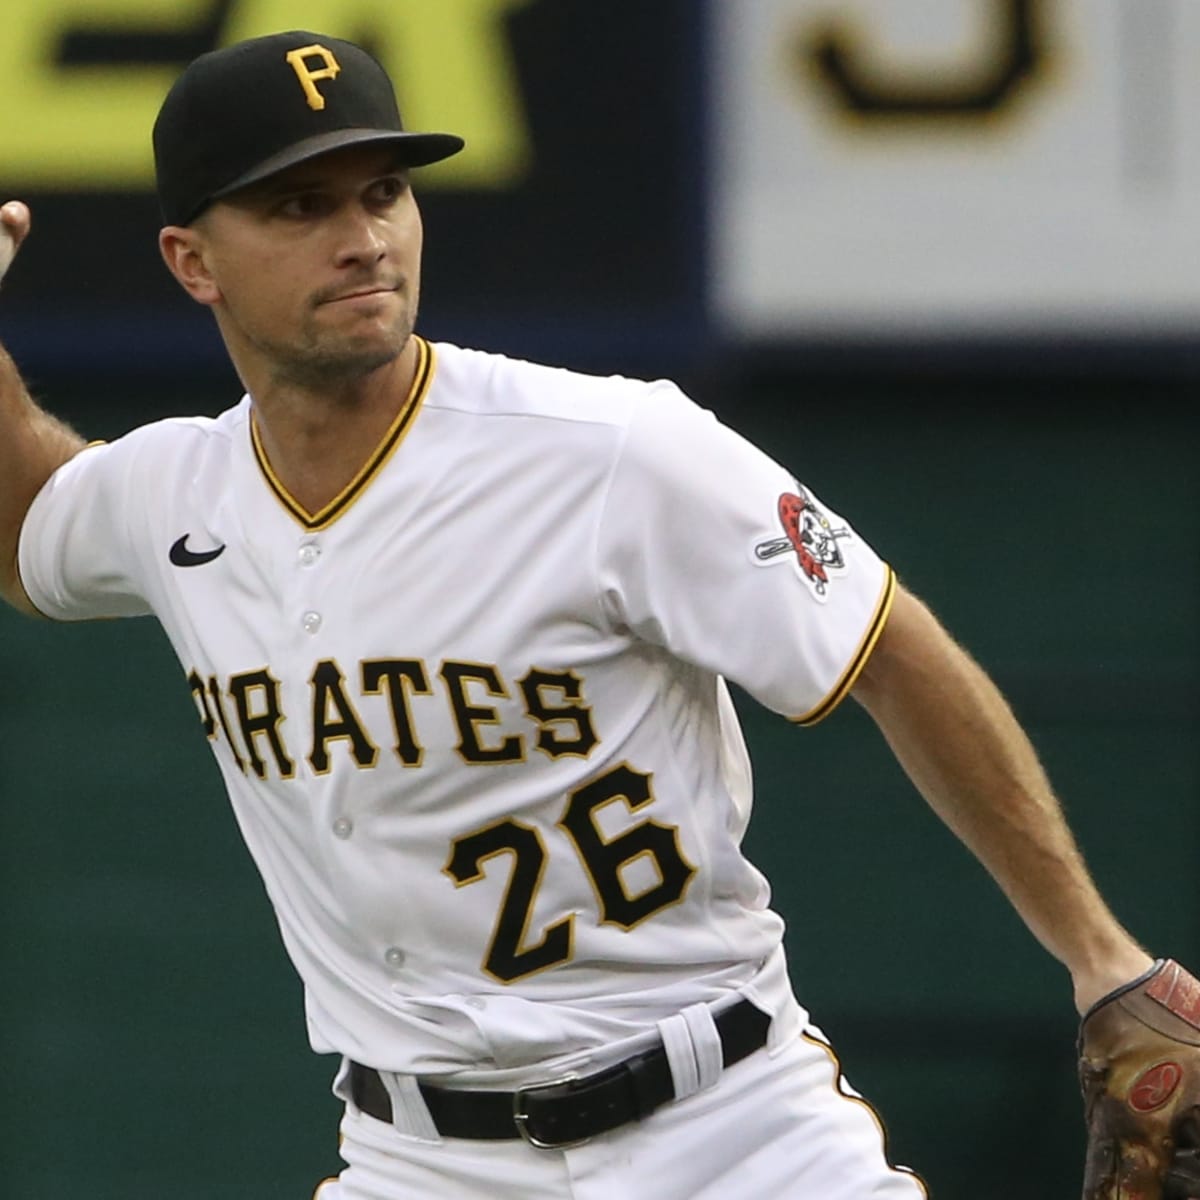 Padres acquire INF/OF Adam Frazier from Pirates, by FriarWire